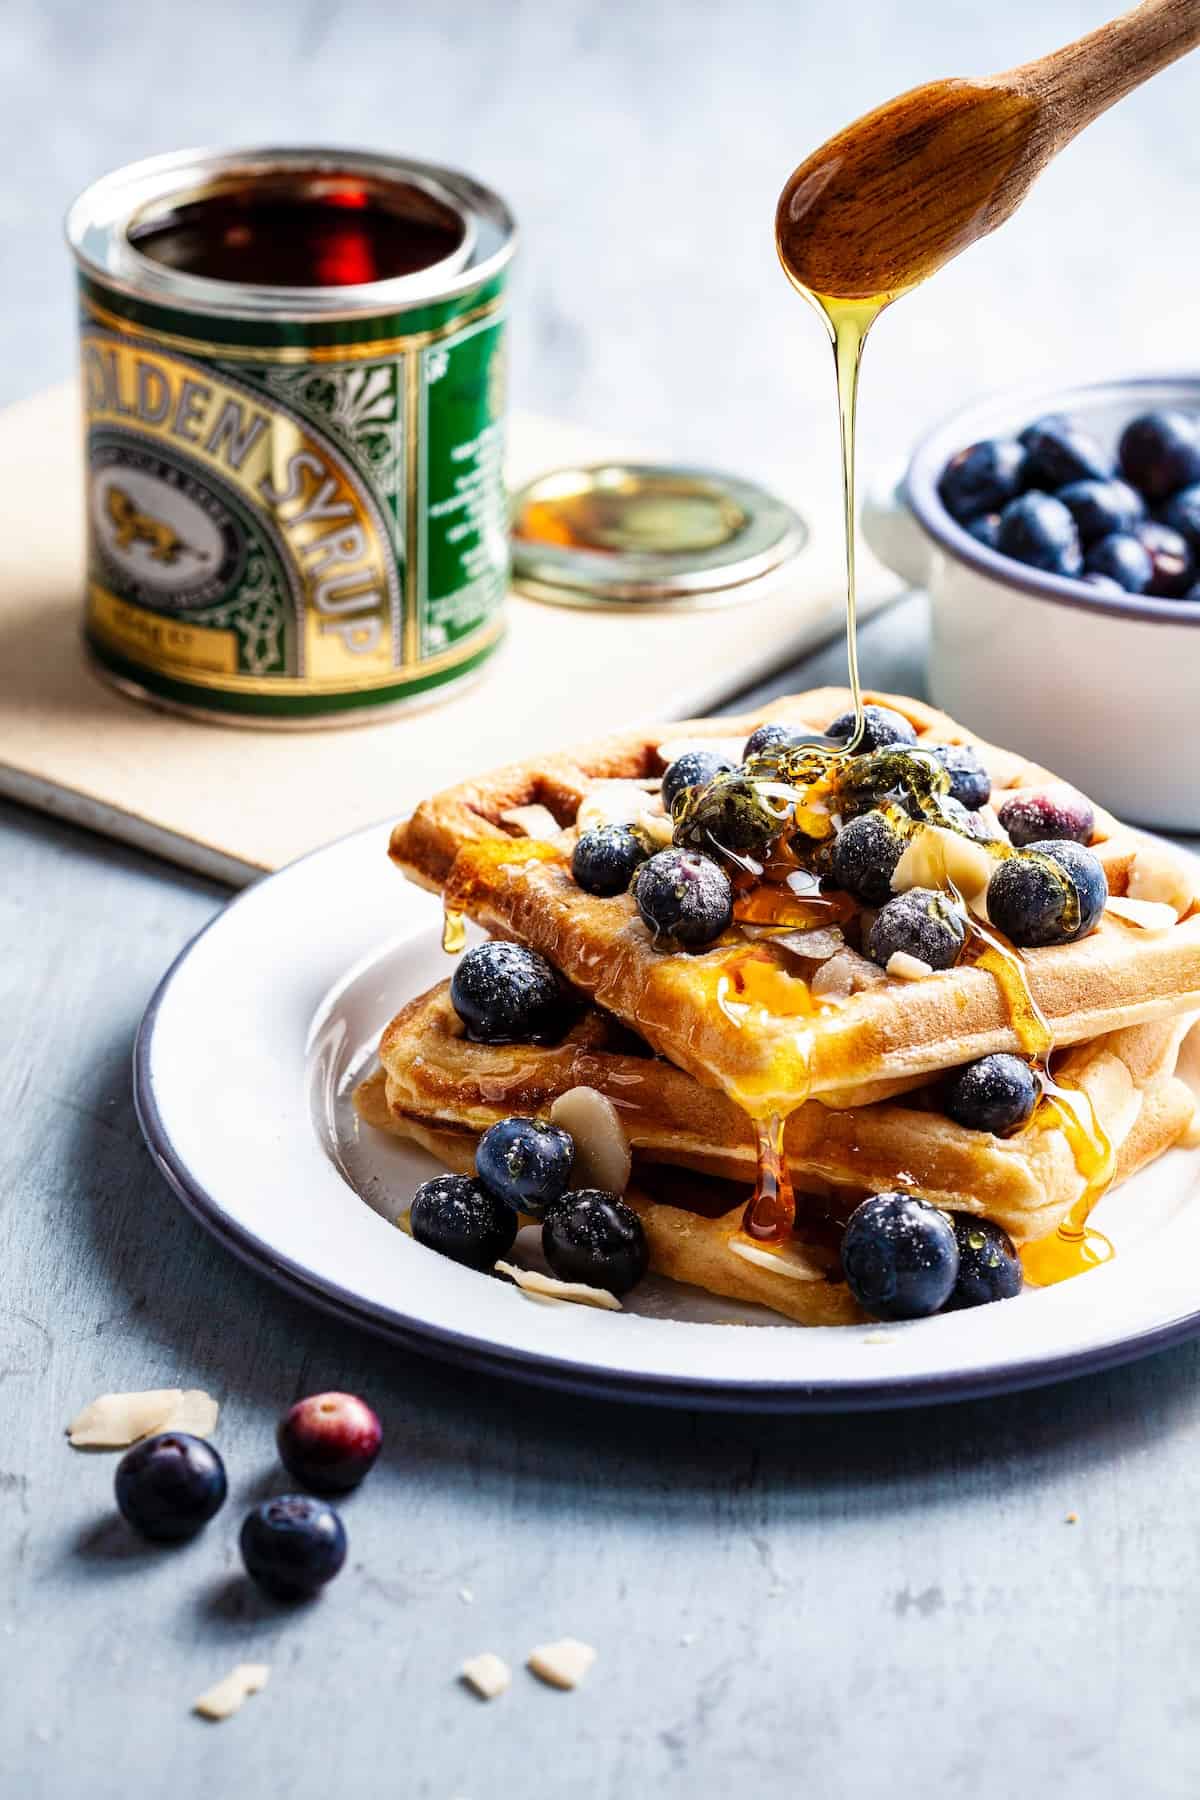 DIY frozen waffles that are plated with fresh blueberries and golden syrup.